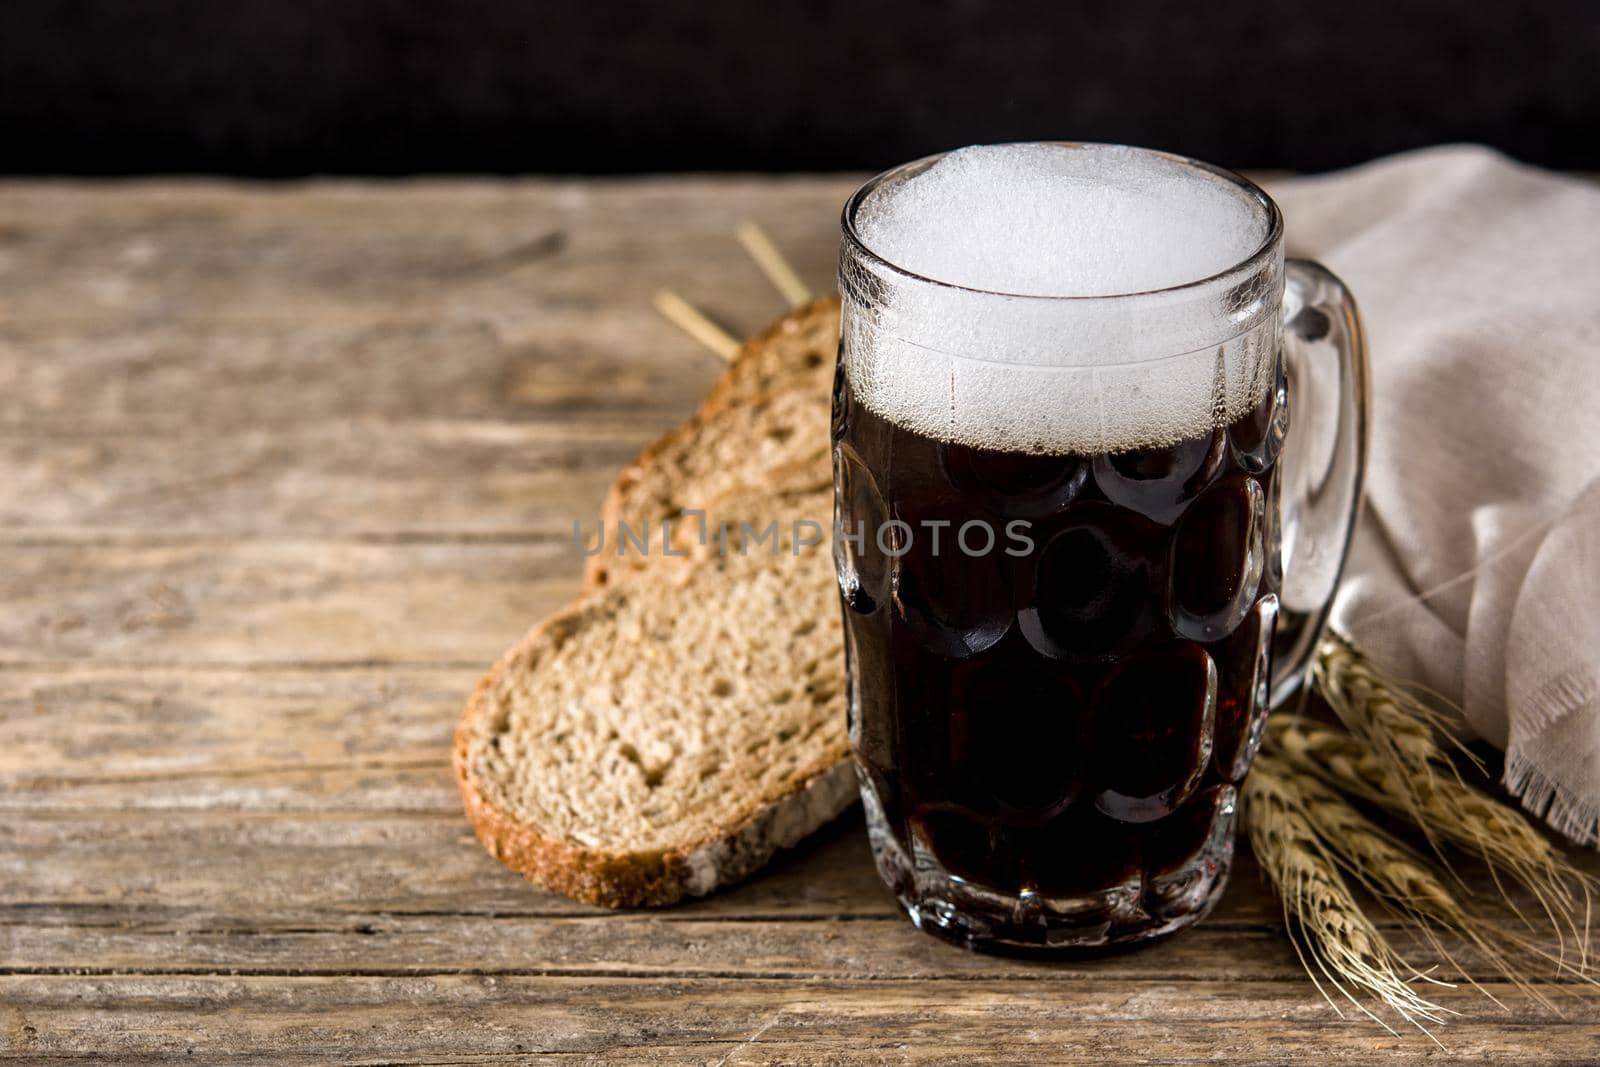 Traditional kvass beer mug with rye bread by chandlervid85